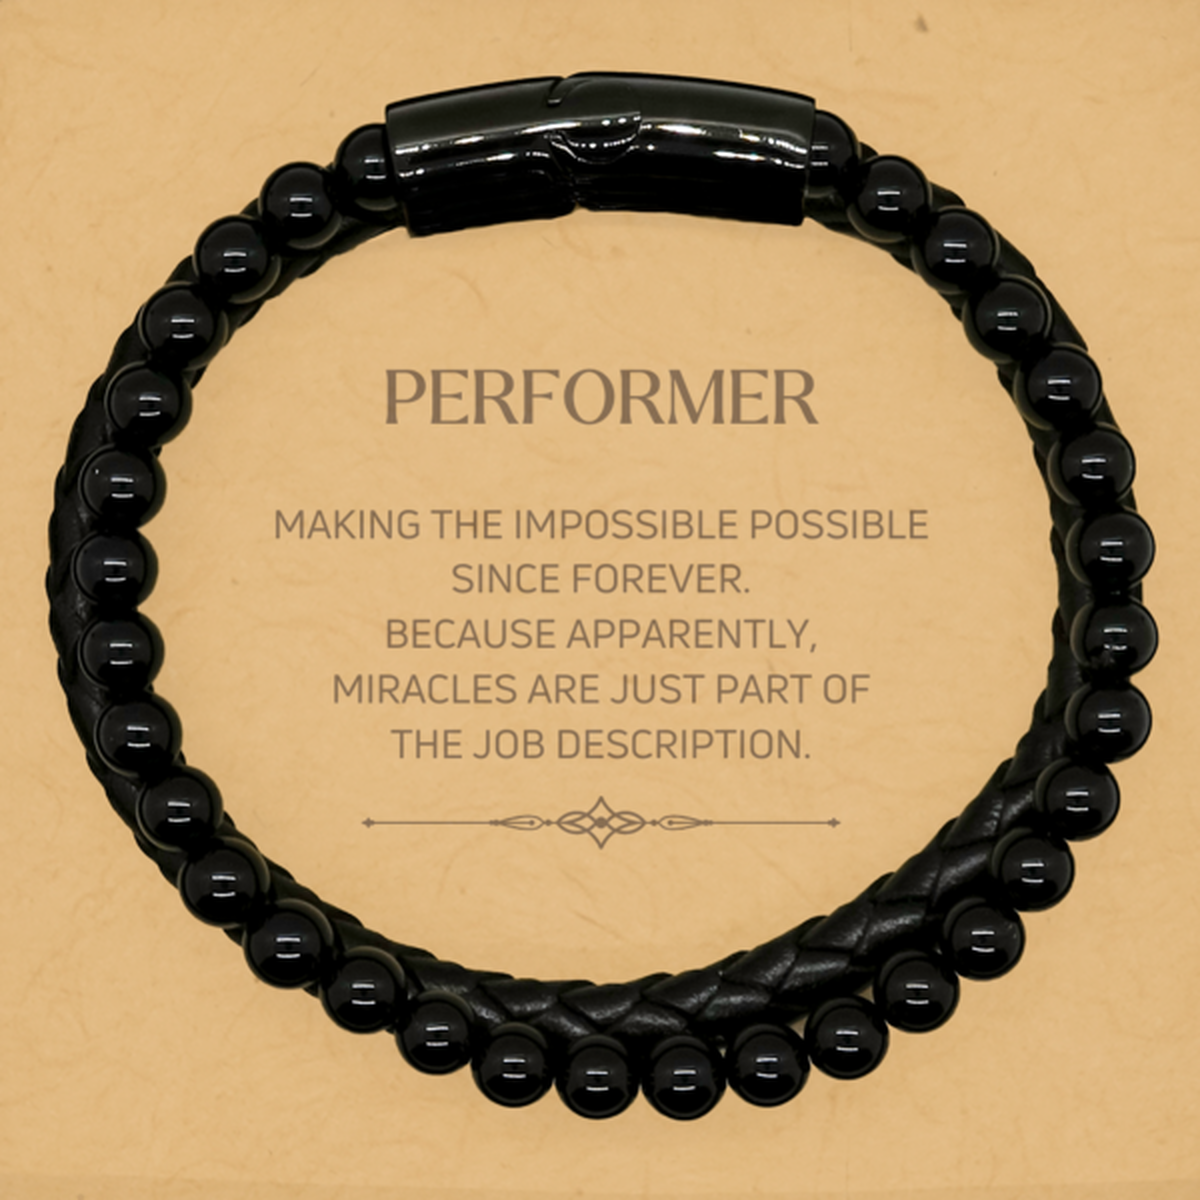 Funny Performer Gifts, Miracles are just part of the job description, Inspirational Birthday Stone Leather Bracelets For Performer, Men, Women, Coworkers, Friends, Boss